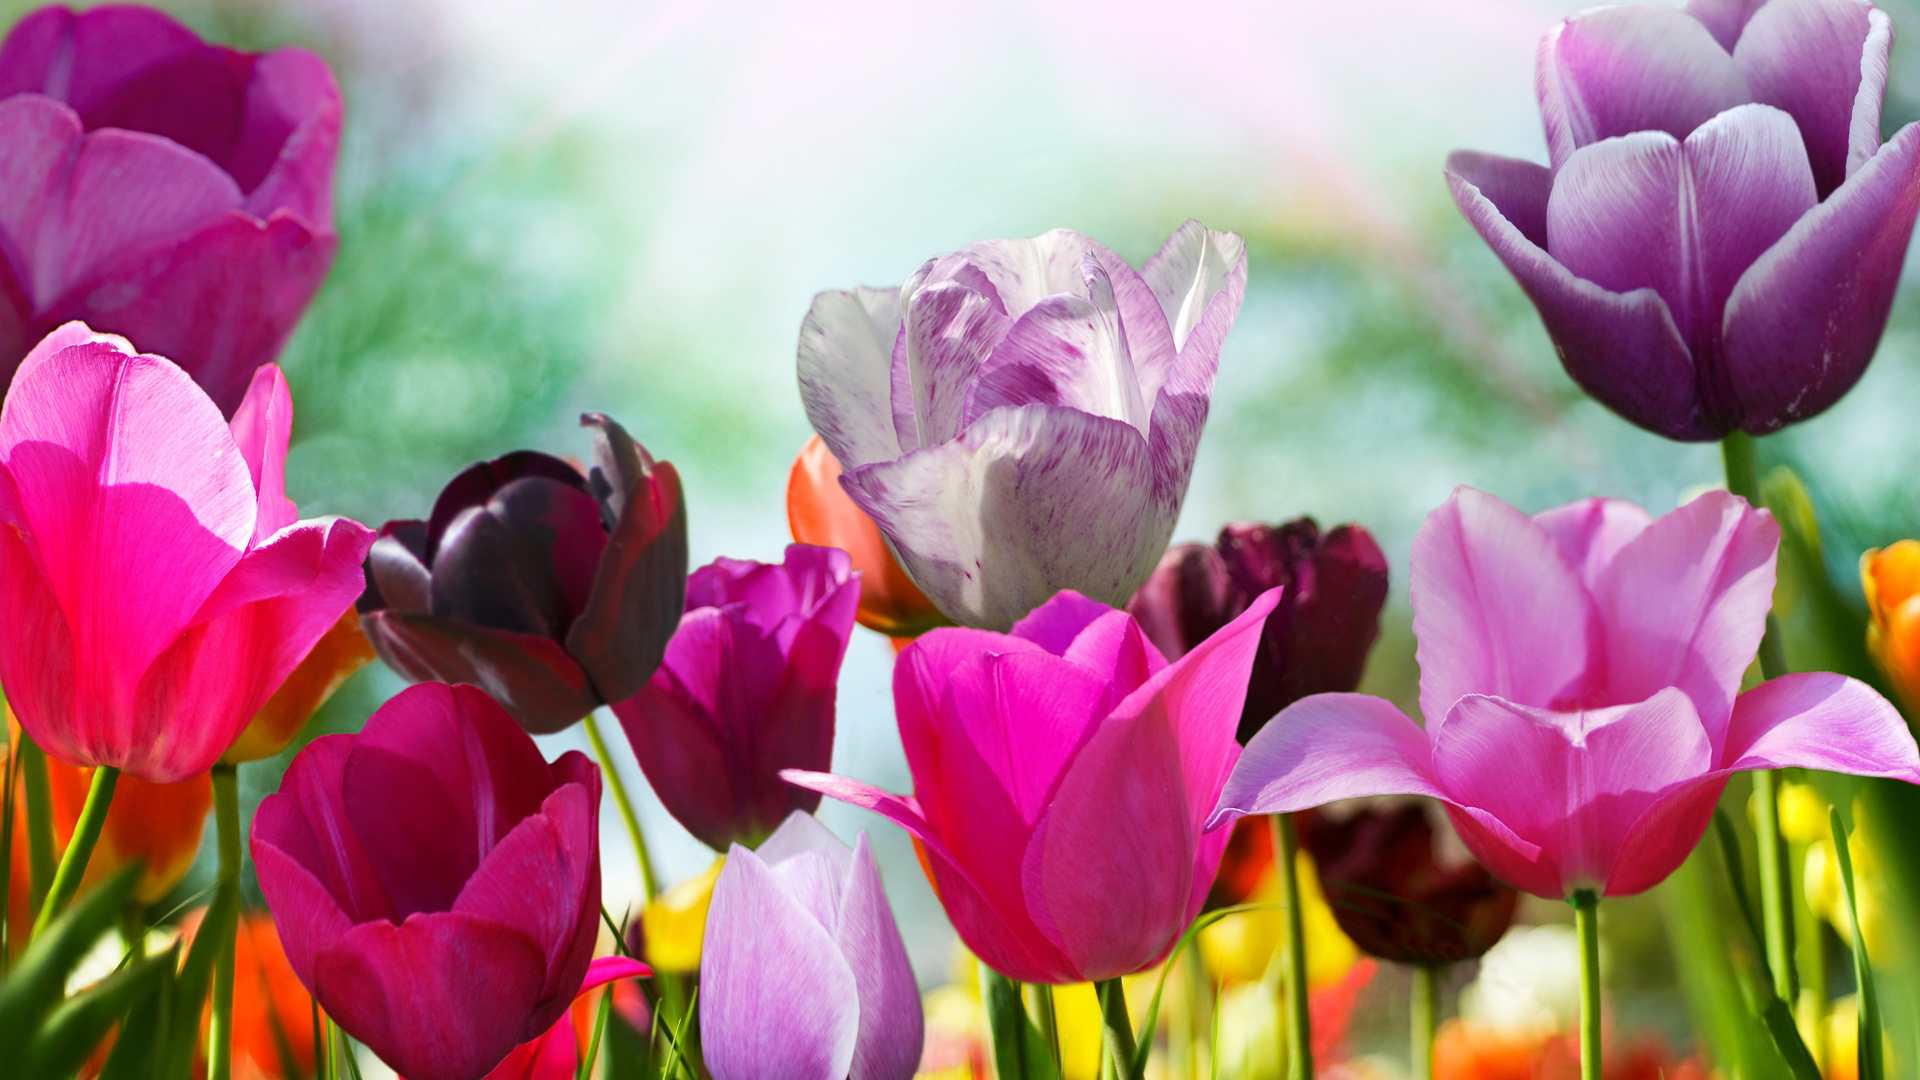 Purple and Pink Tulips in Bloom During Daytime. Wallpaper in 1920x1080 Resolution